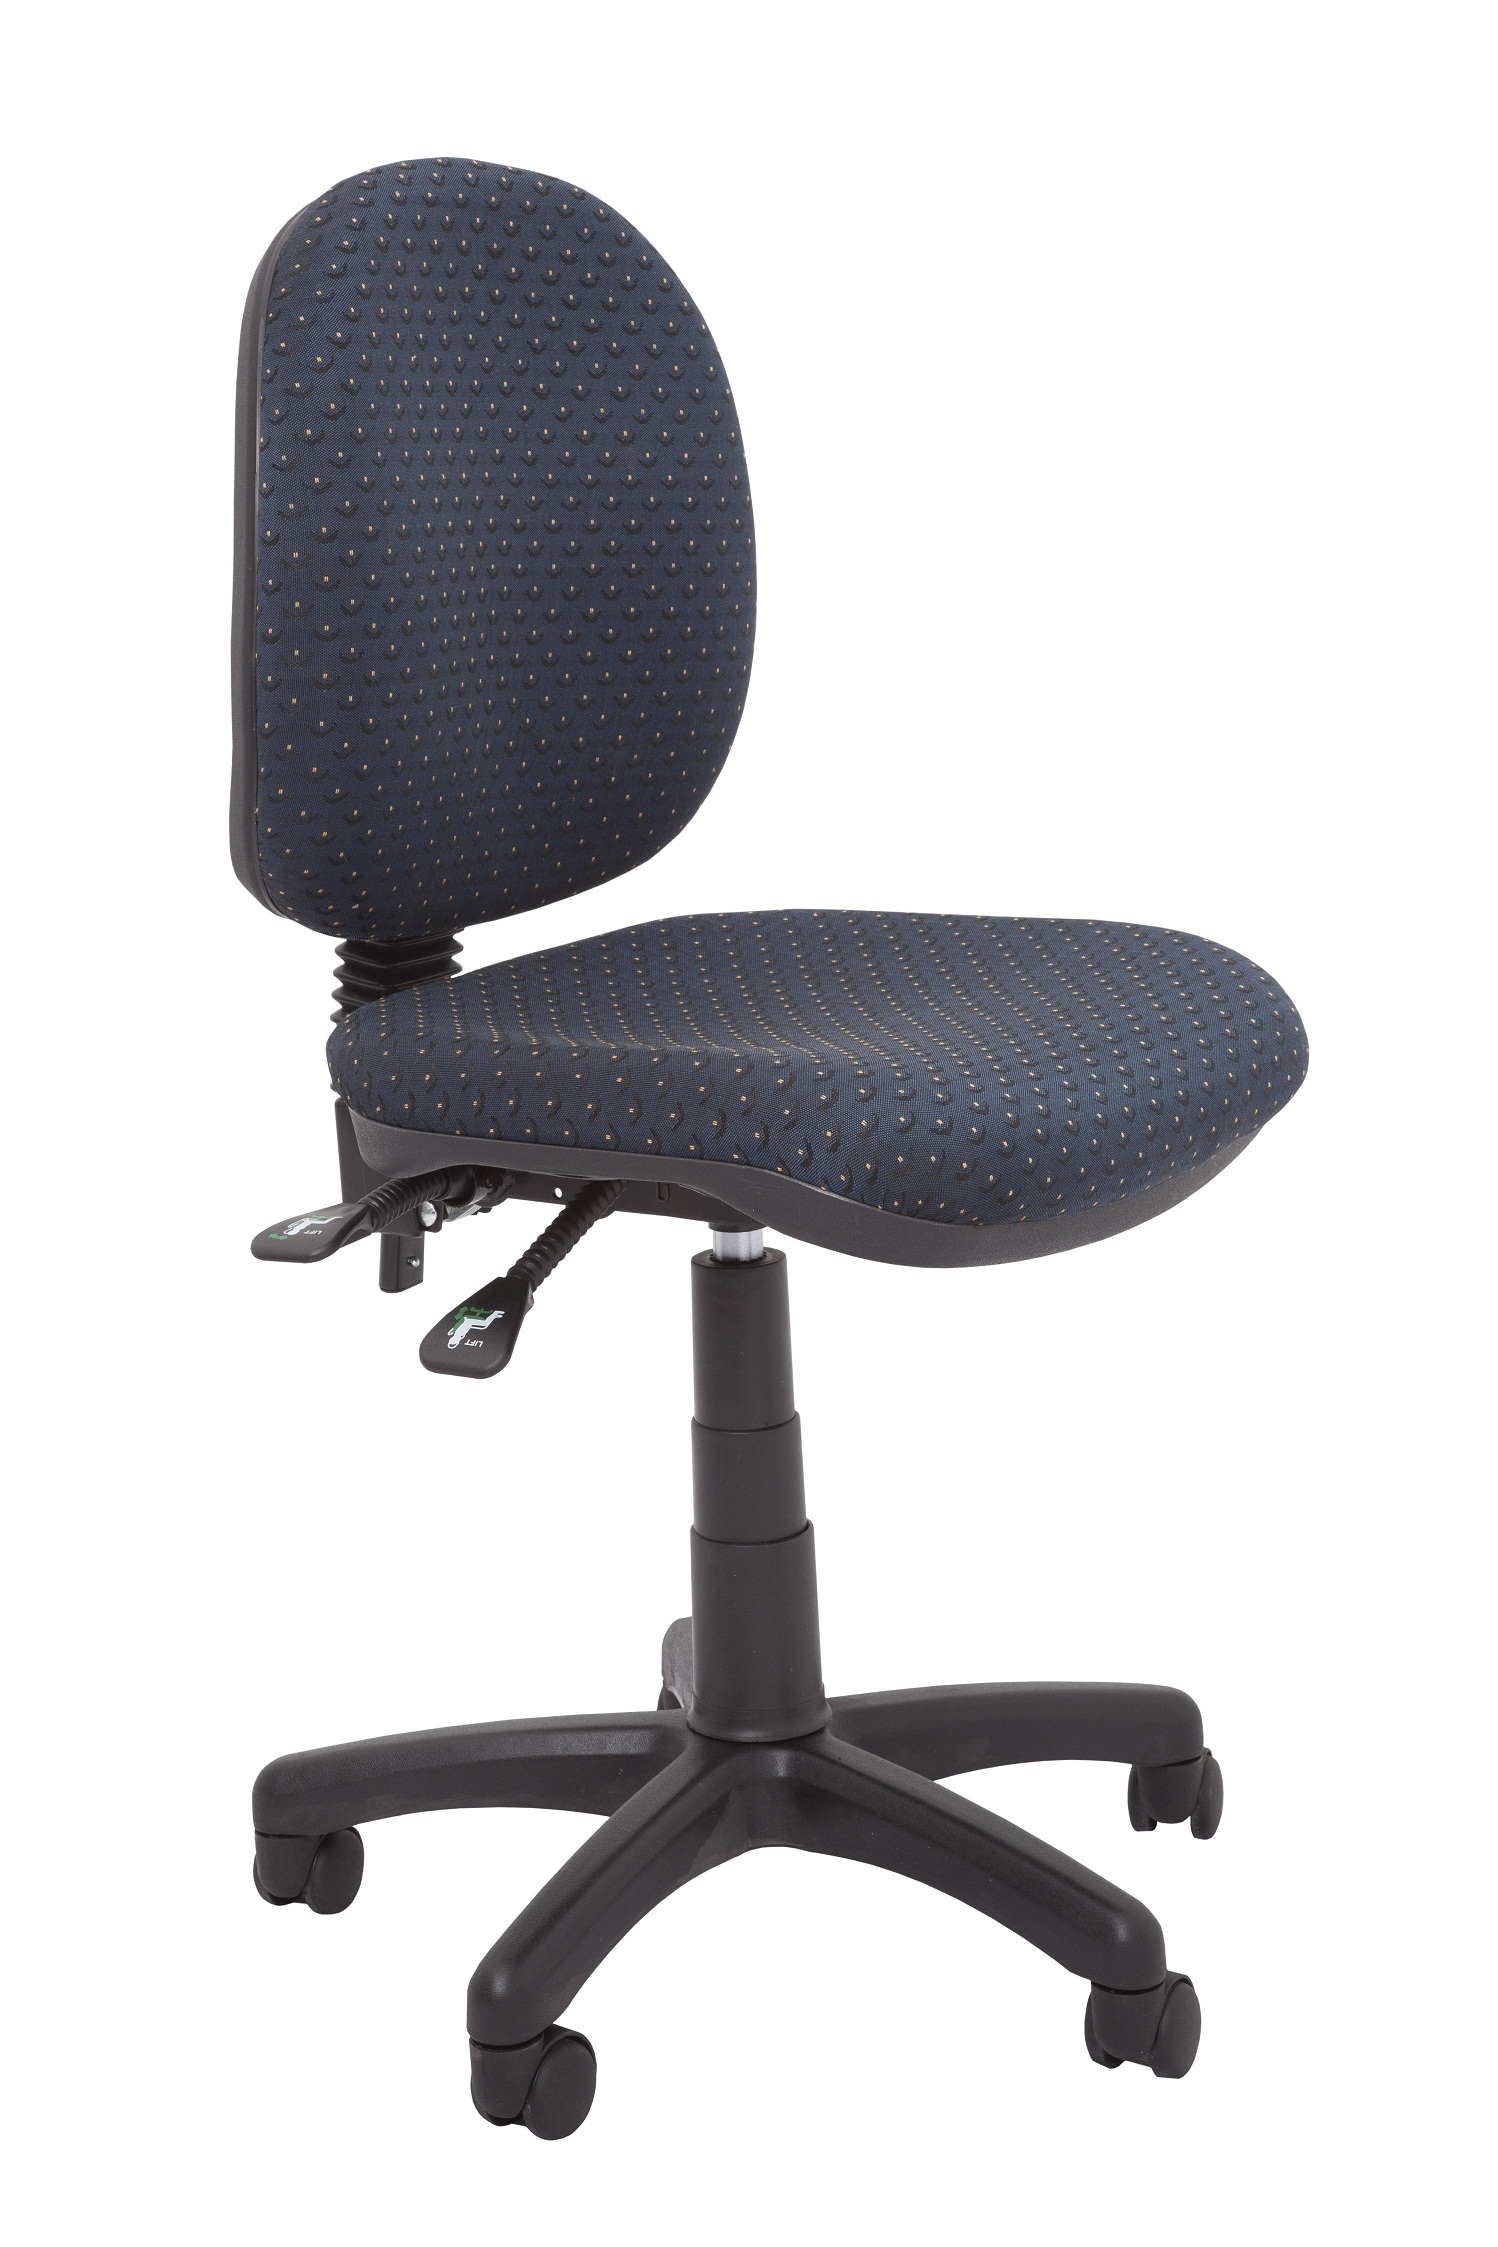 FET10 Budget Typist Chair | Office Direct QLD